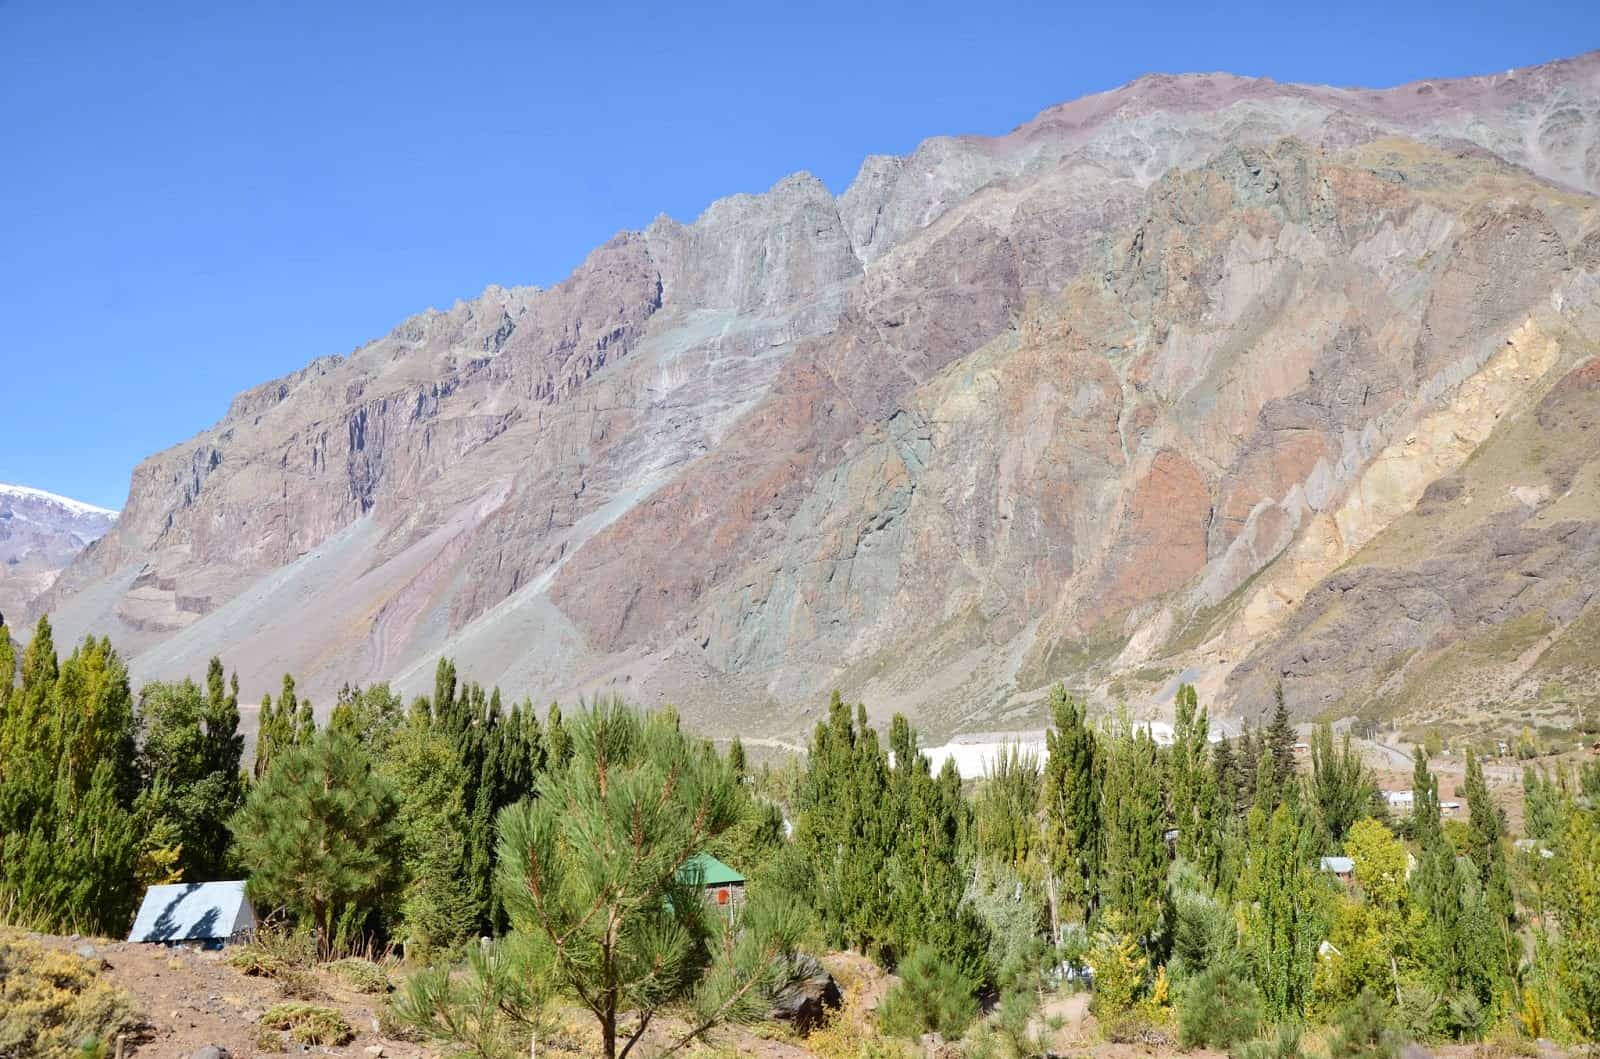 The changing colors of the mountain near the end of the day at El Morado, Cajón del Maipo, Chile